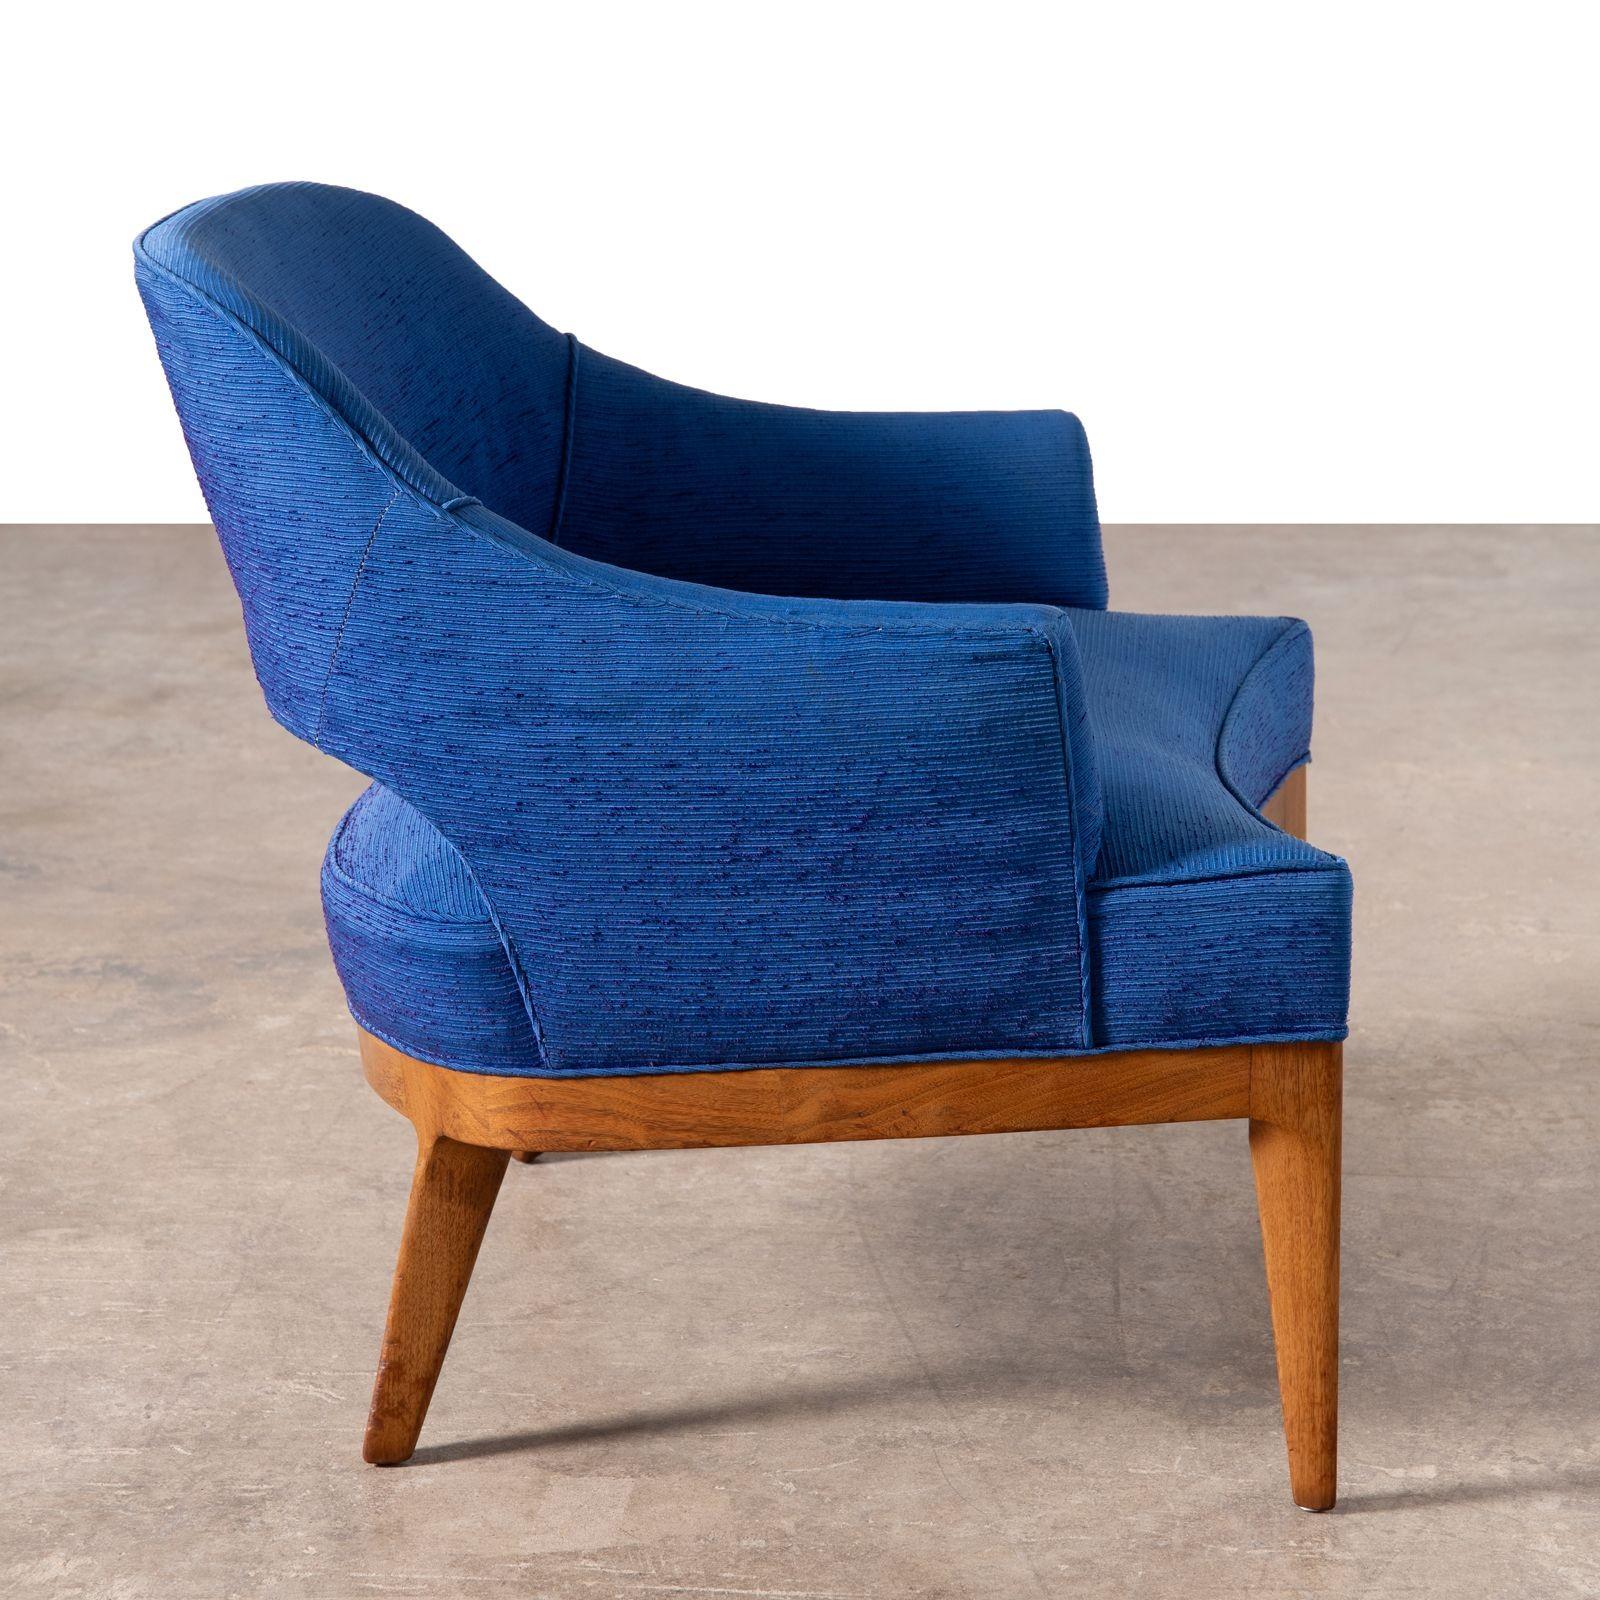 Erwin Lambeth Open Back Lounge Chairs in Raw Blue Silk with Walnut Frames 1960s For Sale 5